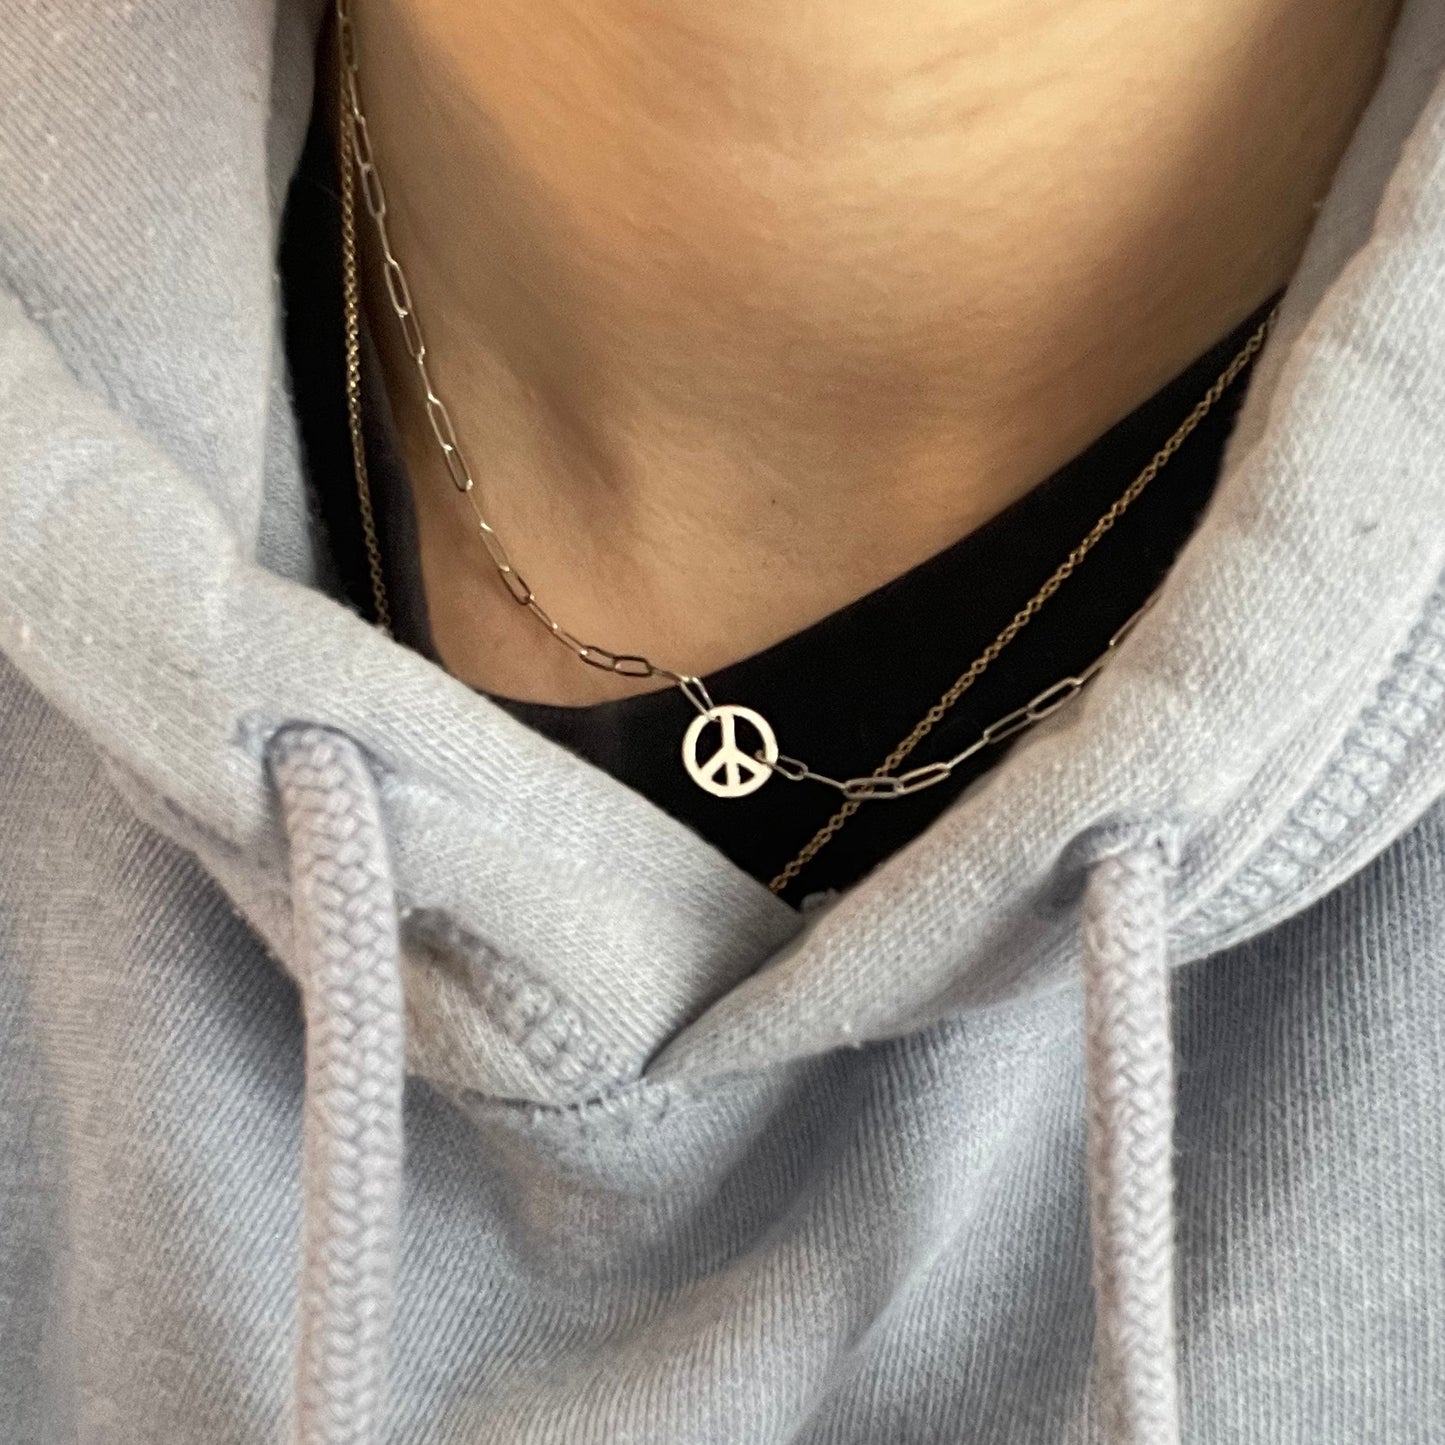 Amazon.com: Amscan Peace Necklace in Black/Silver, 26.5 inch Plastic Retro  Style Unisex Fashion Statement Piece : Clothing, Shoes & Jewelry